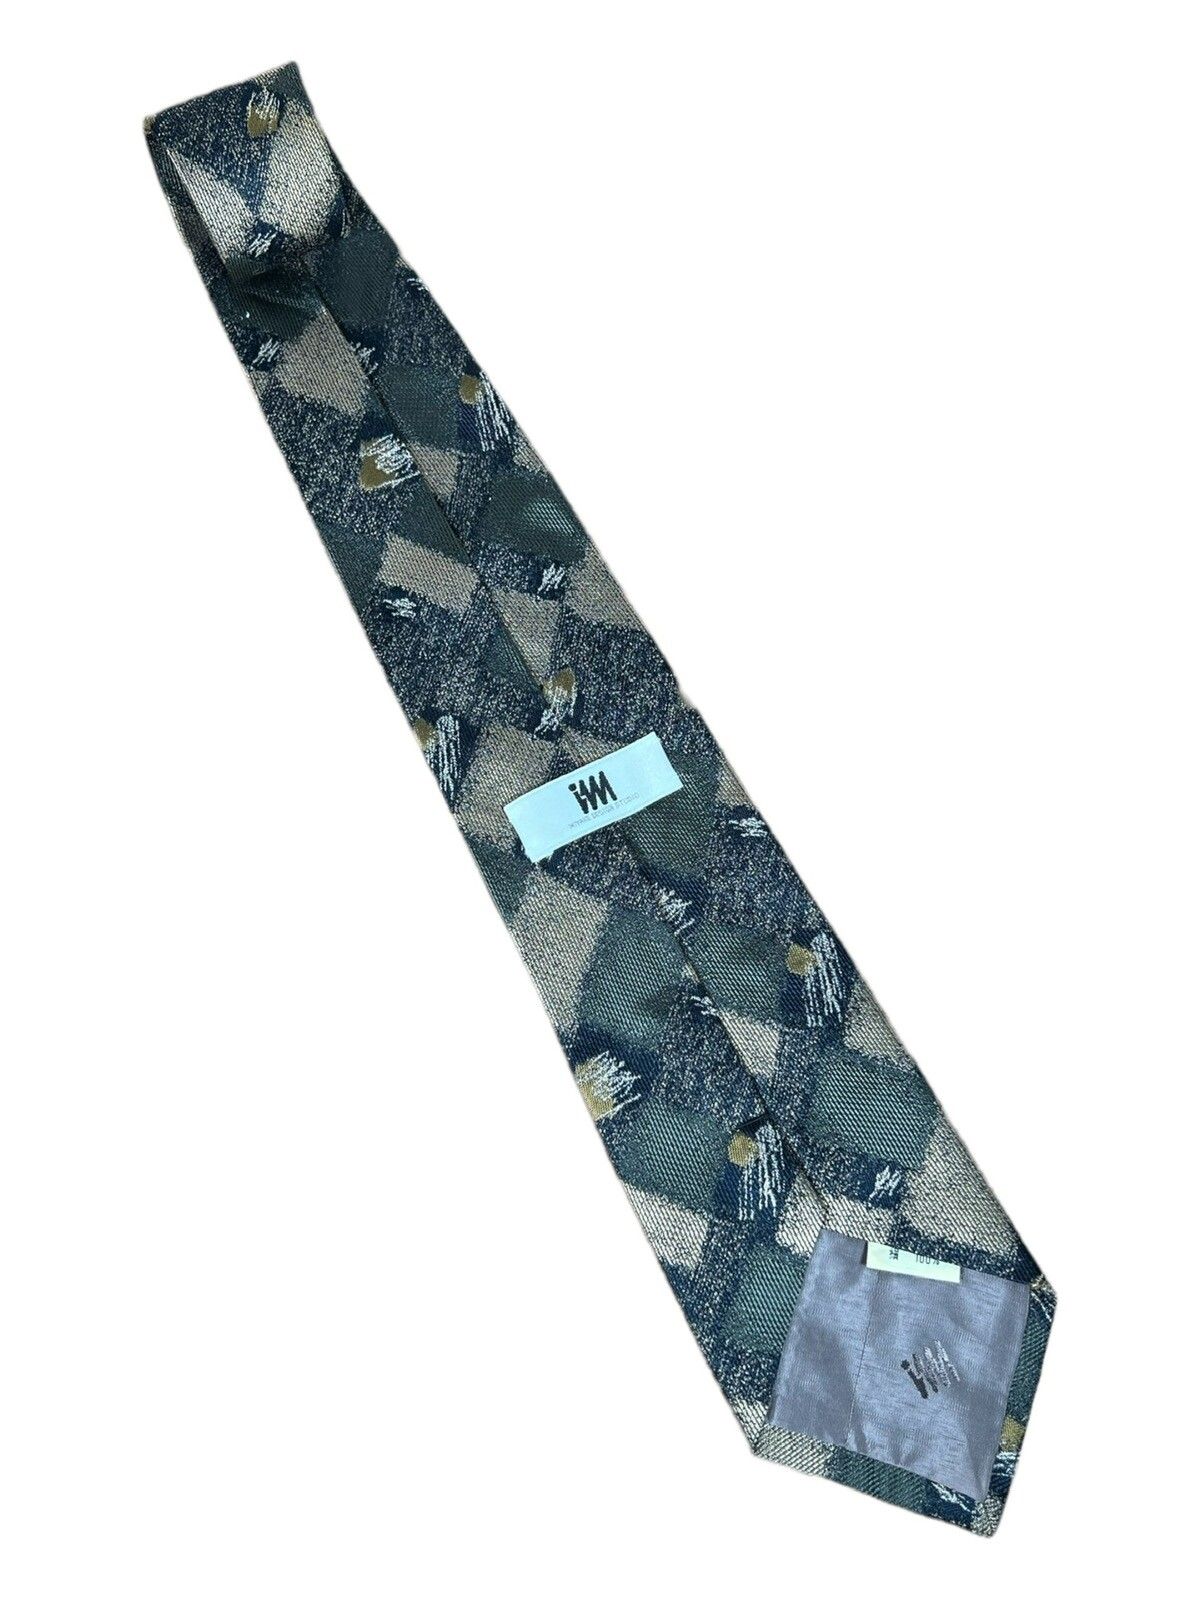 Issey Miyake Scratch Patch Print Issey Miyake Silk Neck Tie Size ONE SIZE - 2 Preview